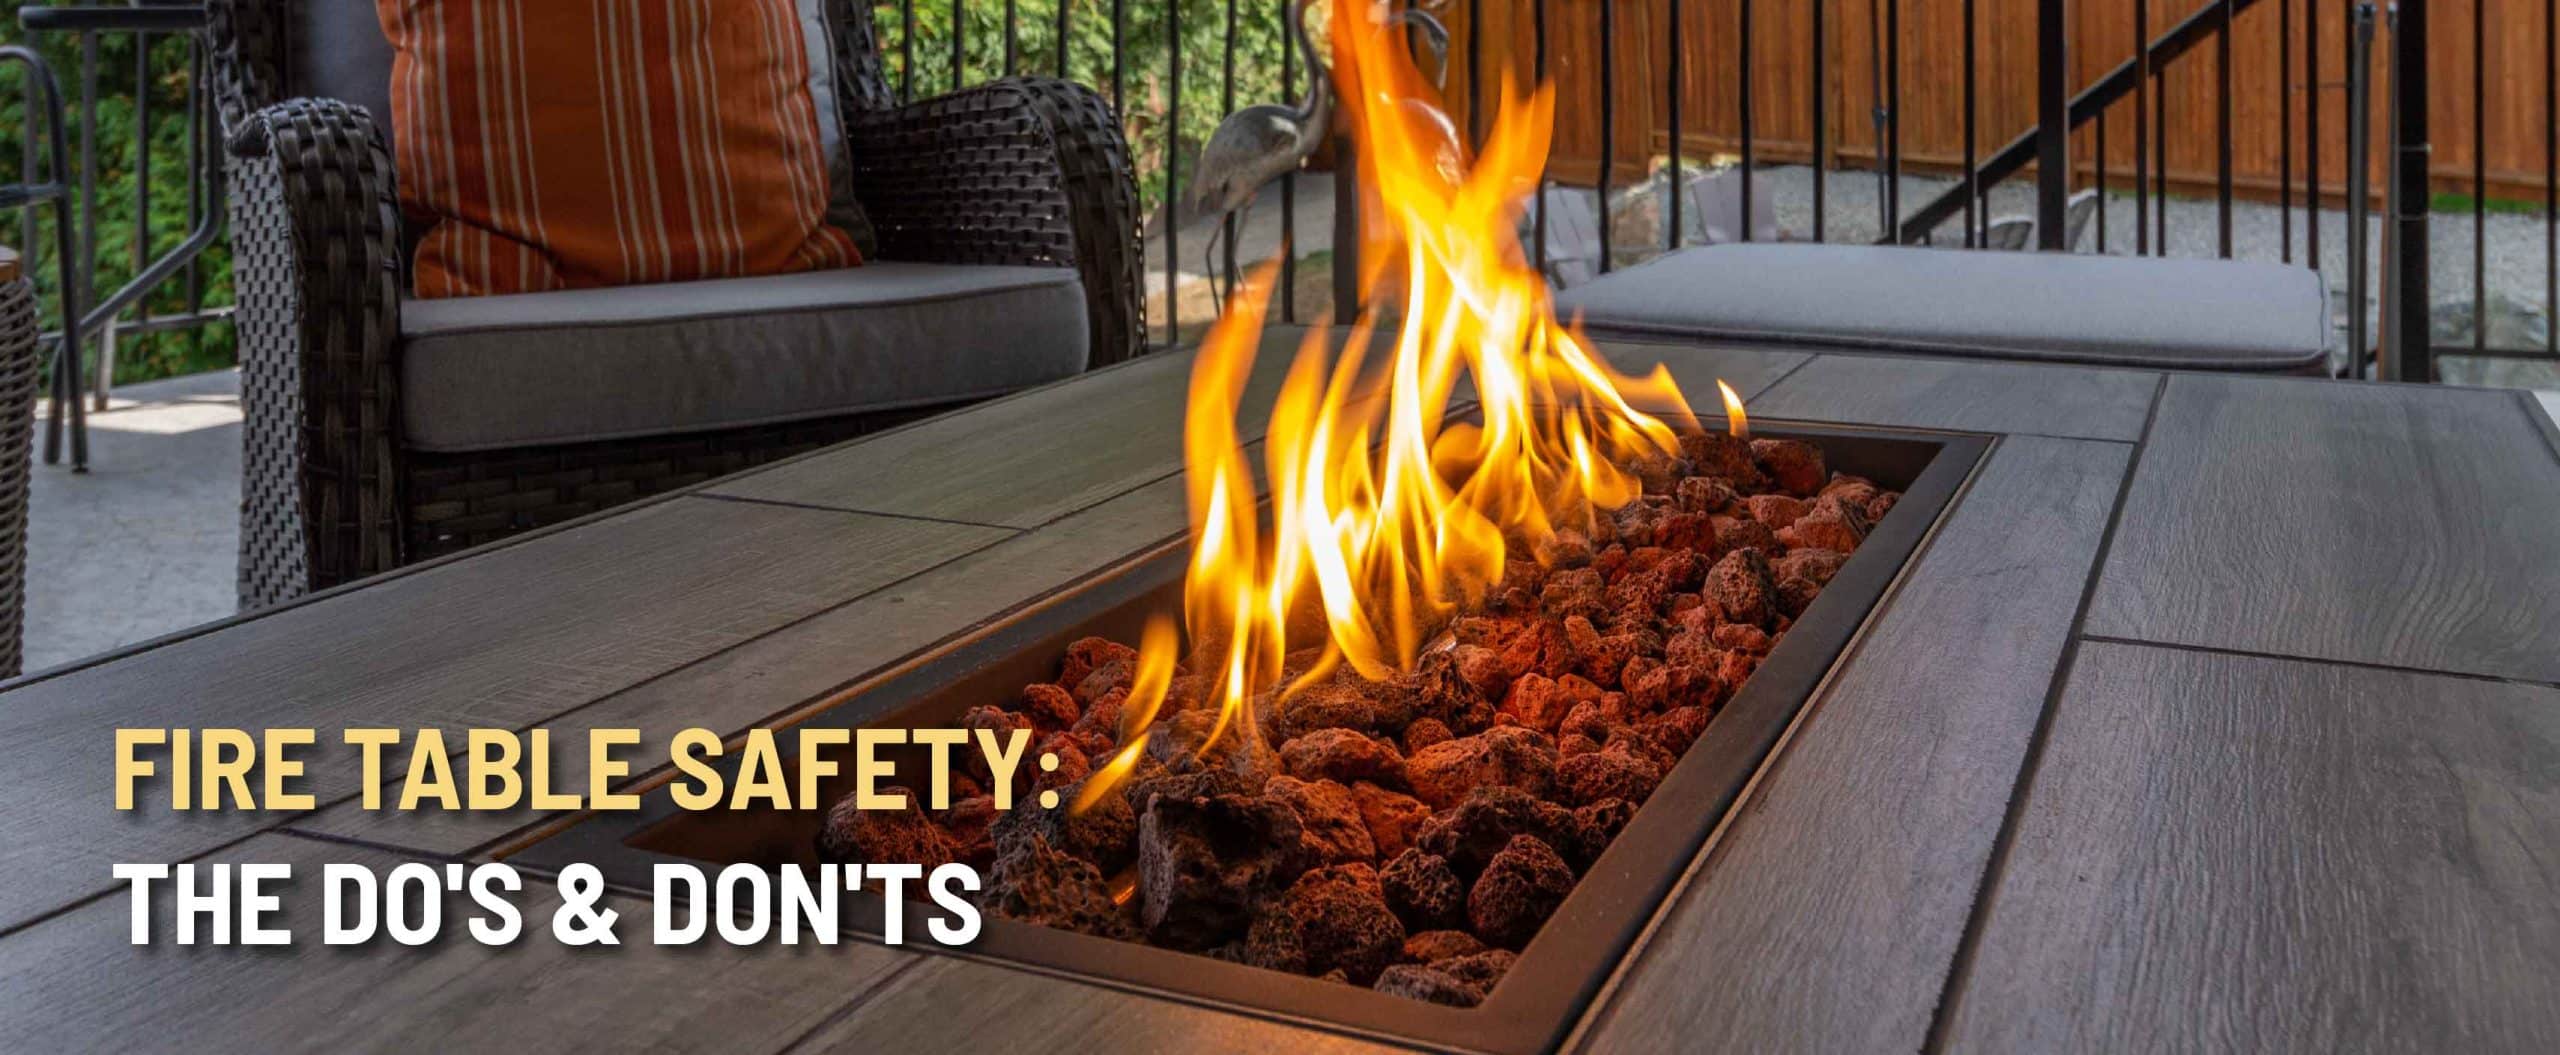 fire table safety